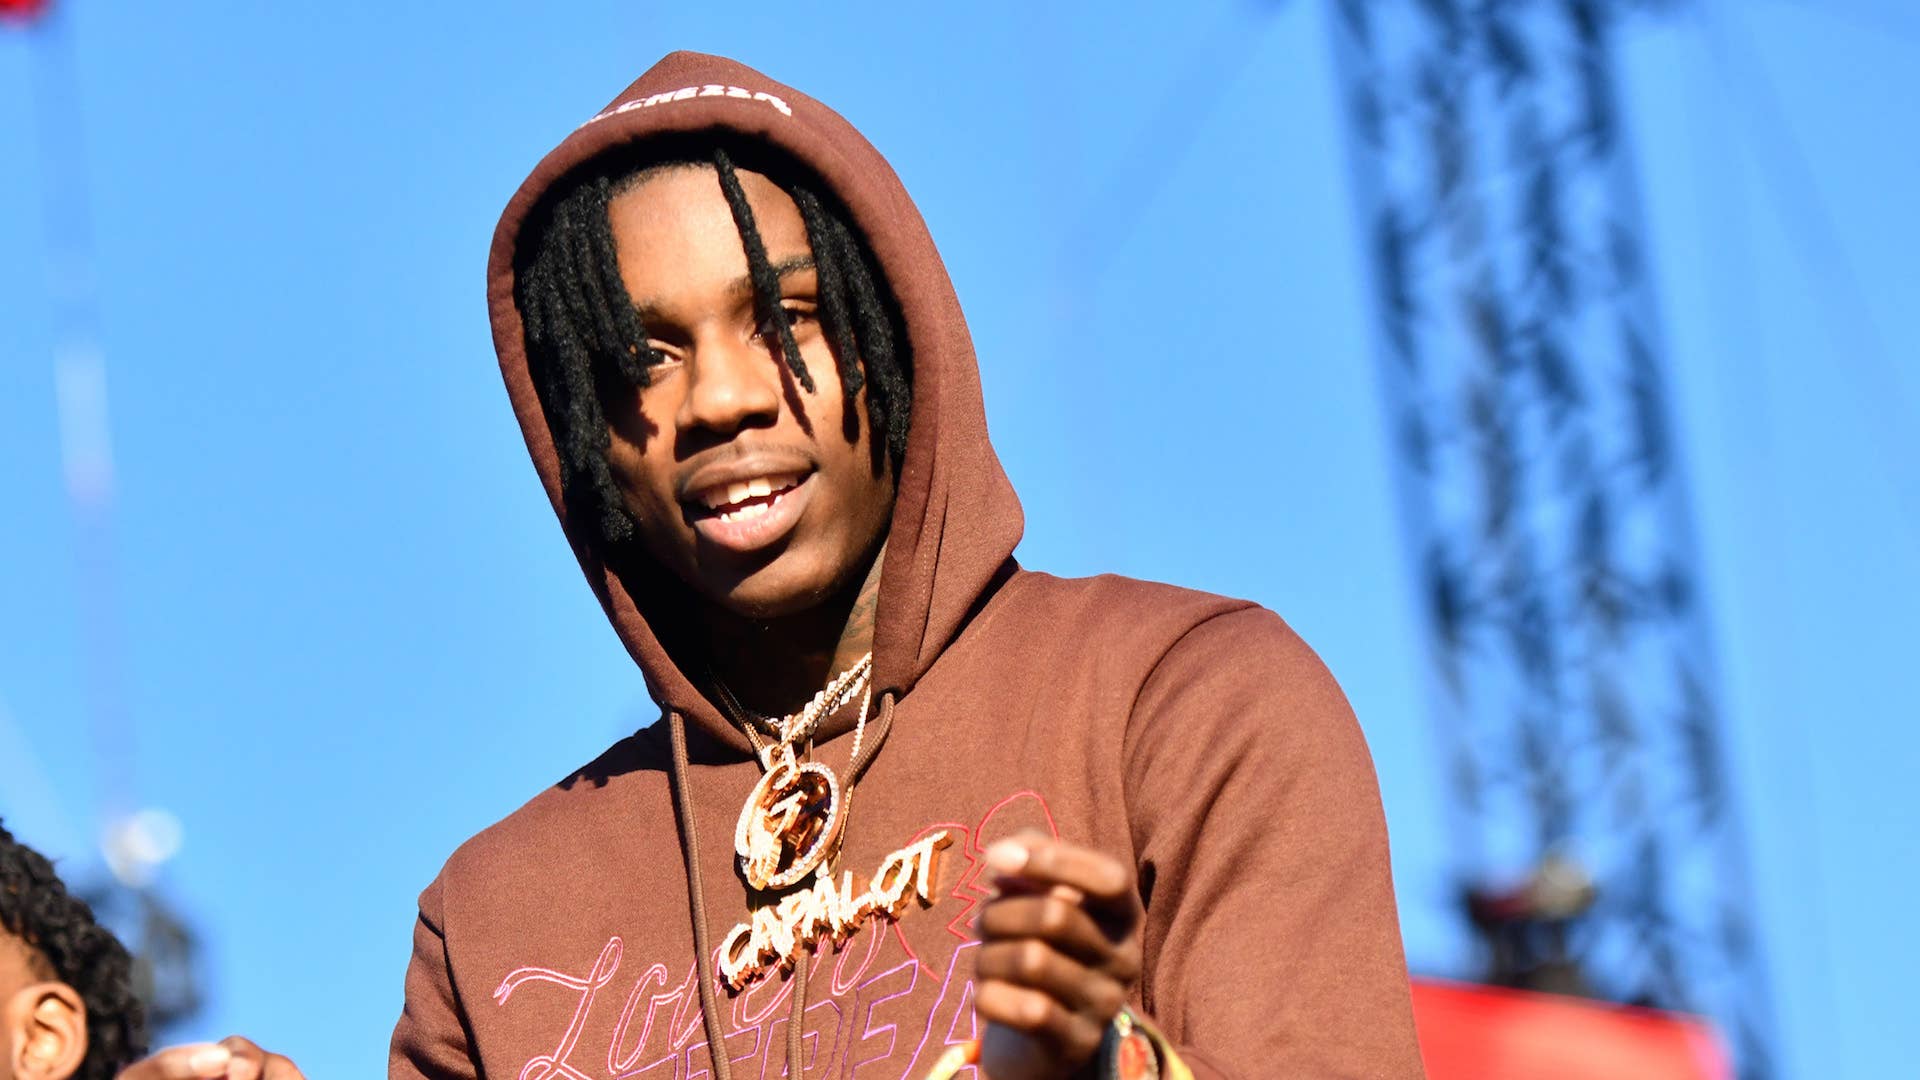 Polo G performs onstage during day 2 of the Rolling Loud Festival